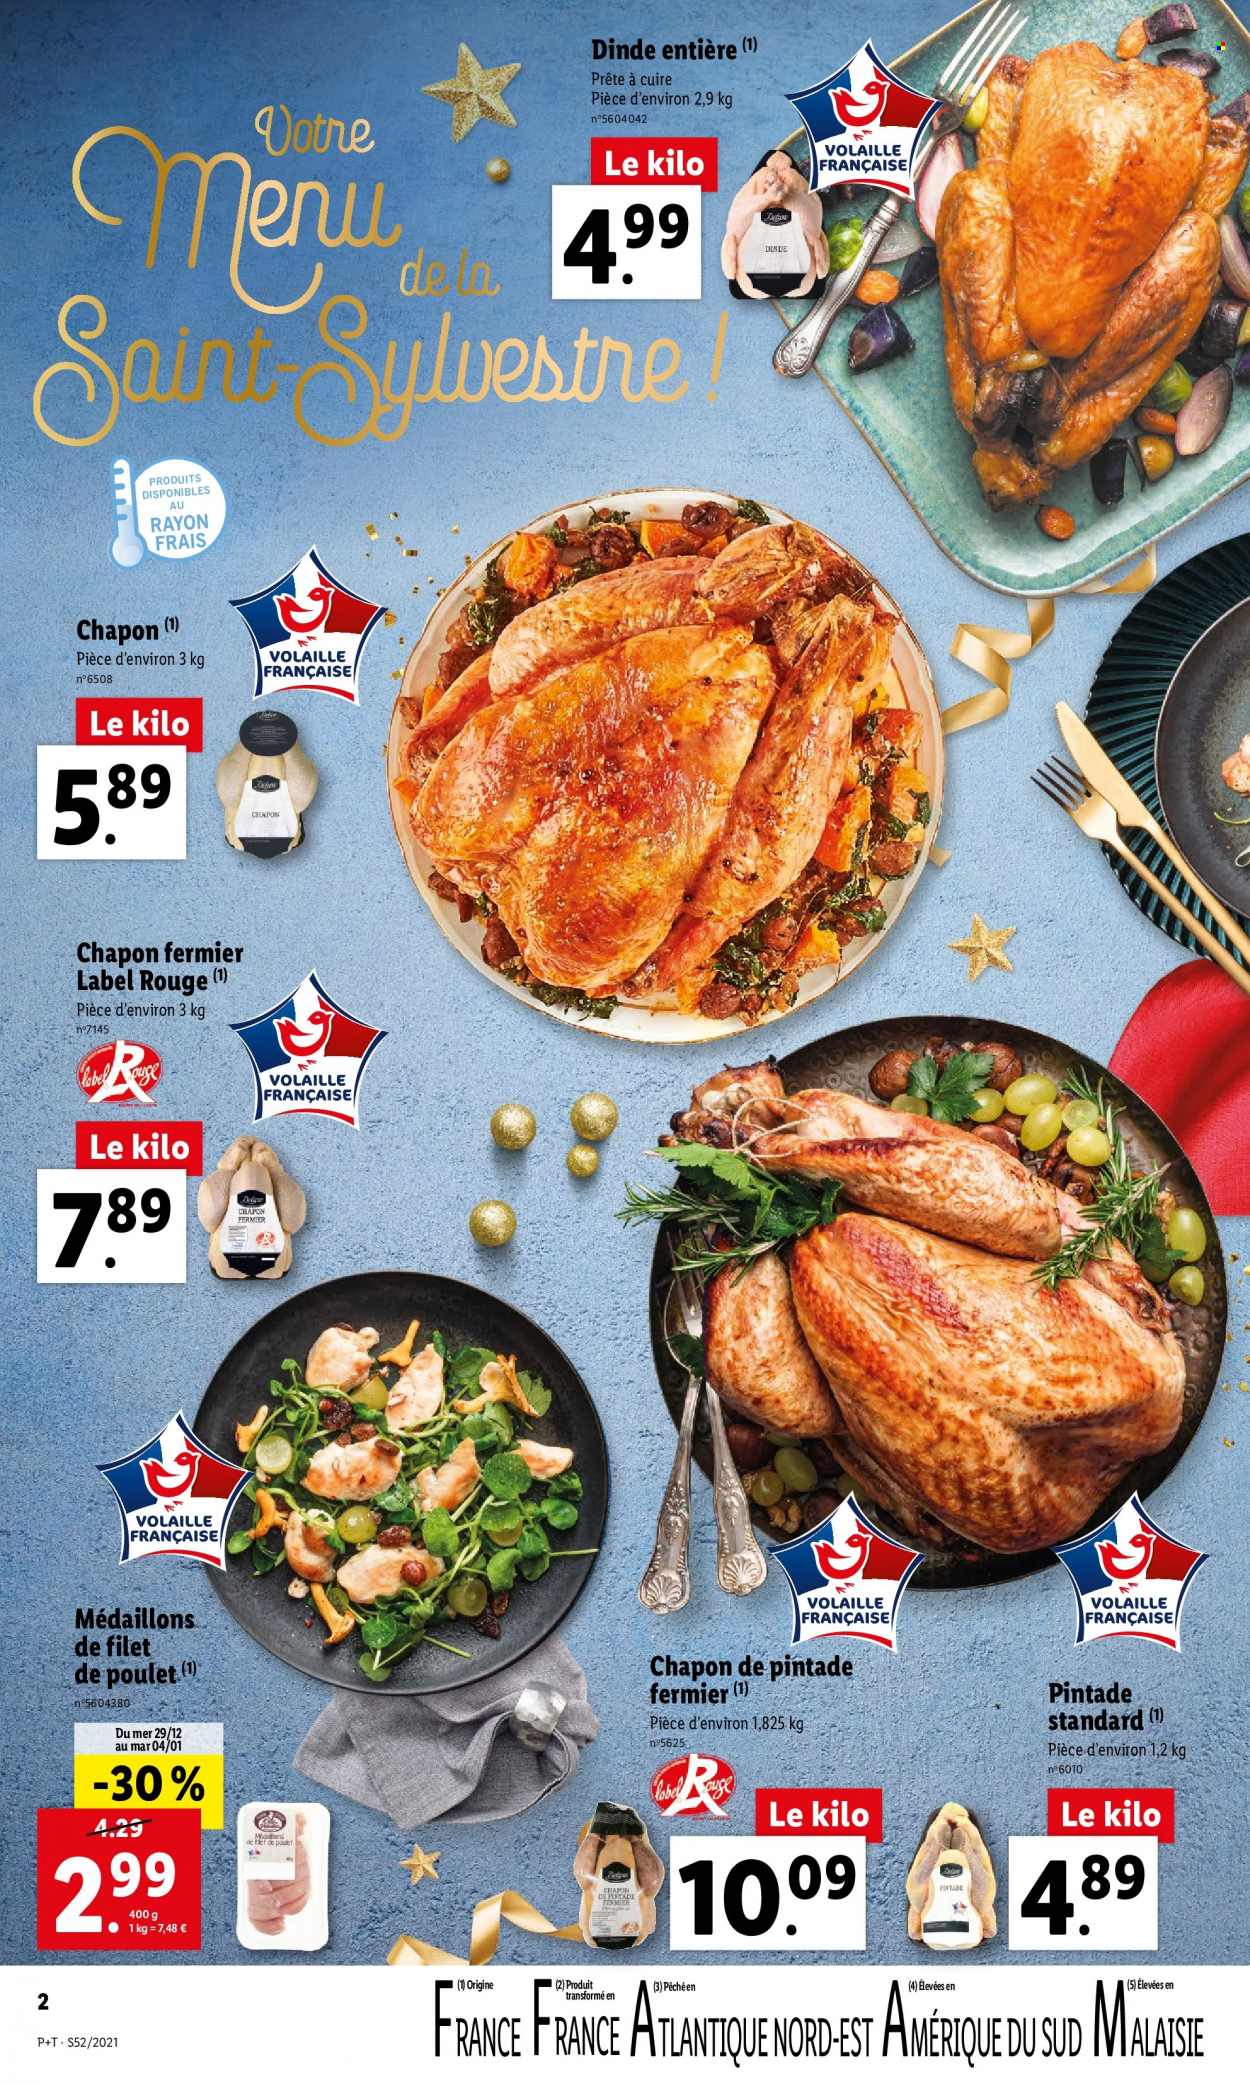 Catalogue Lidl - 29.12.2021 - 04.01.2022. Page 2.